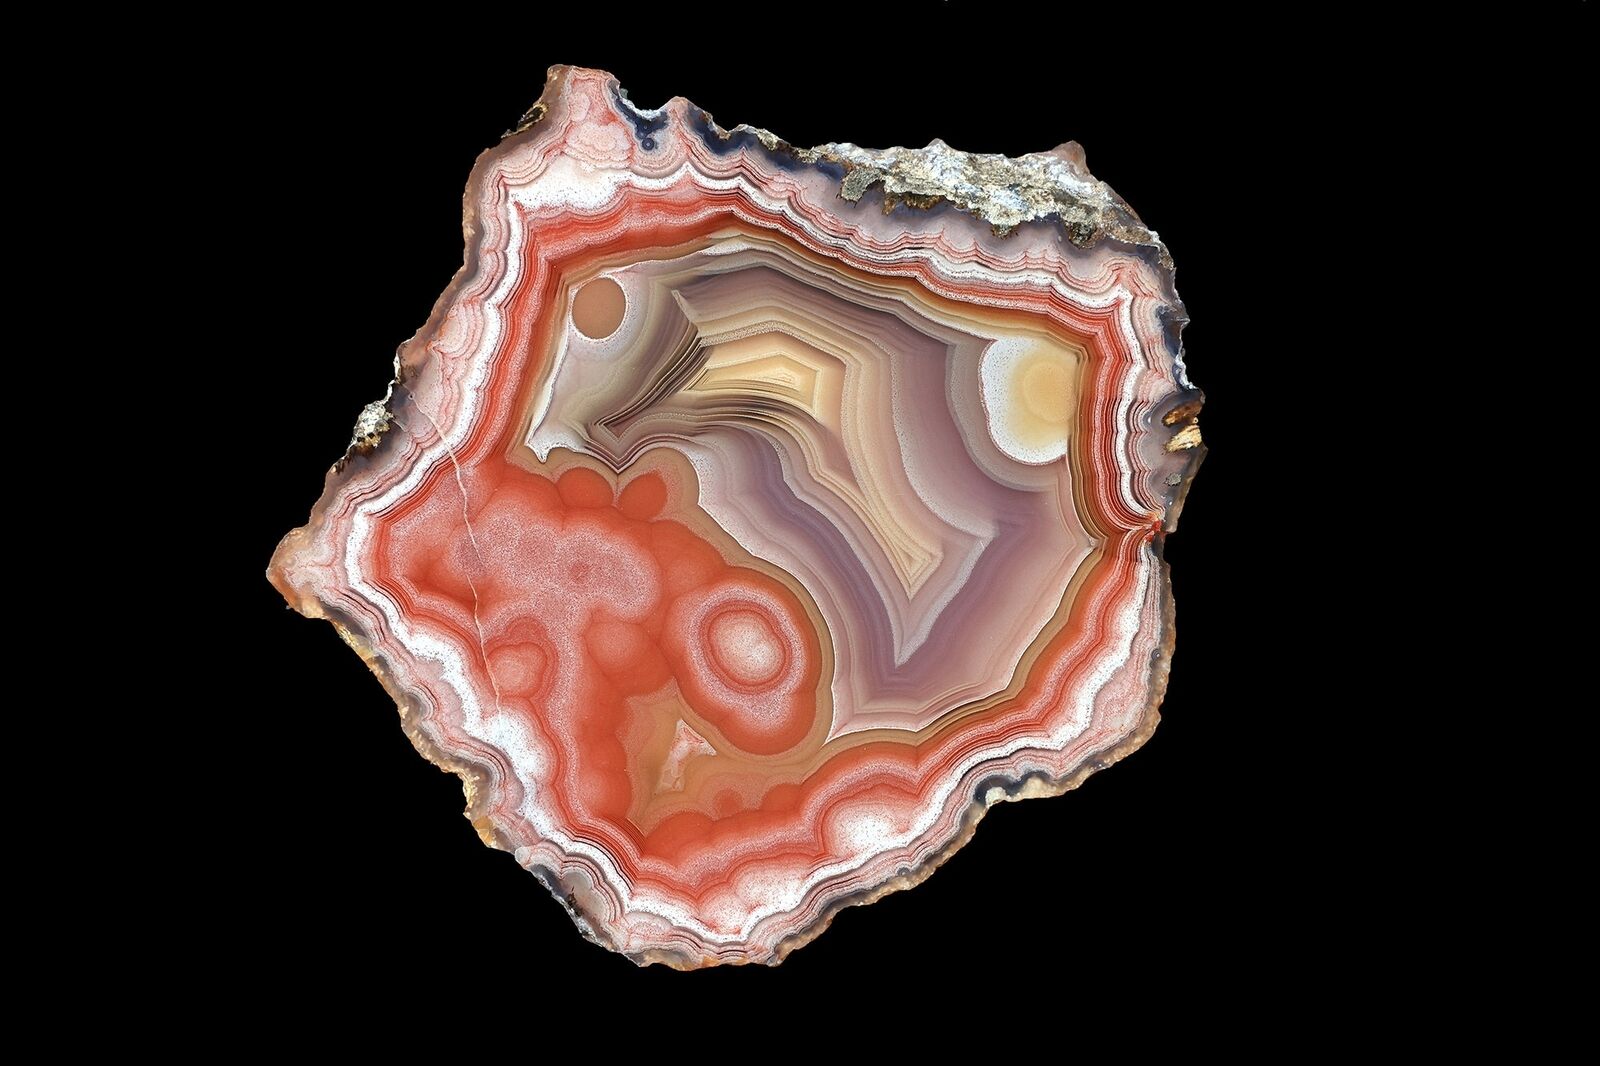 Laguna Agate AAA Grade From Mexico Collectors Grade Tight Banding, Parallax and